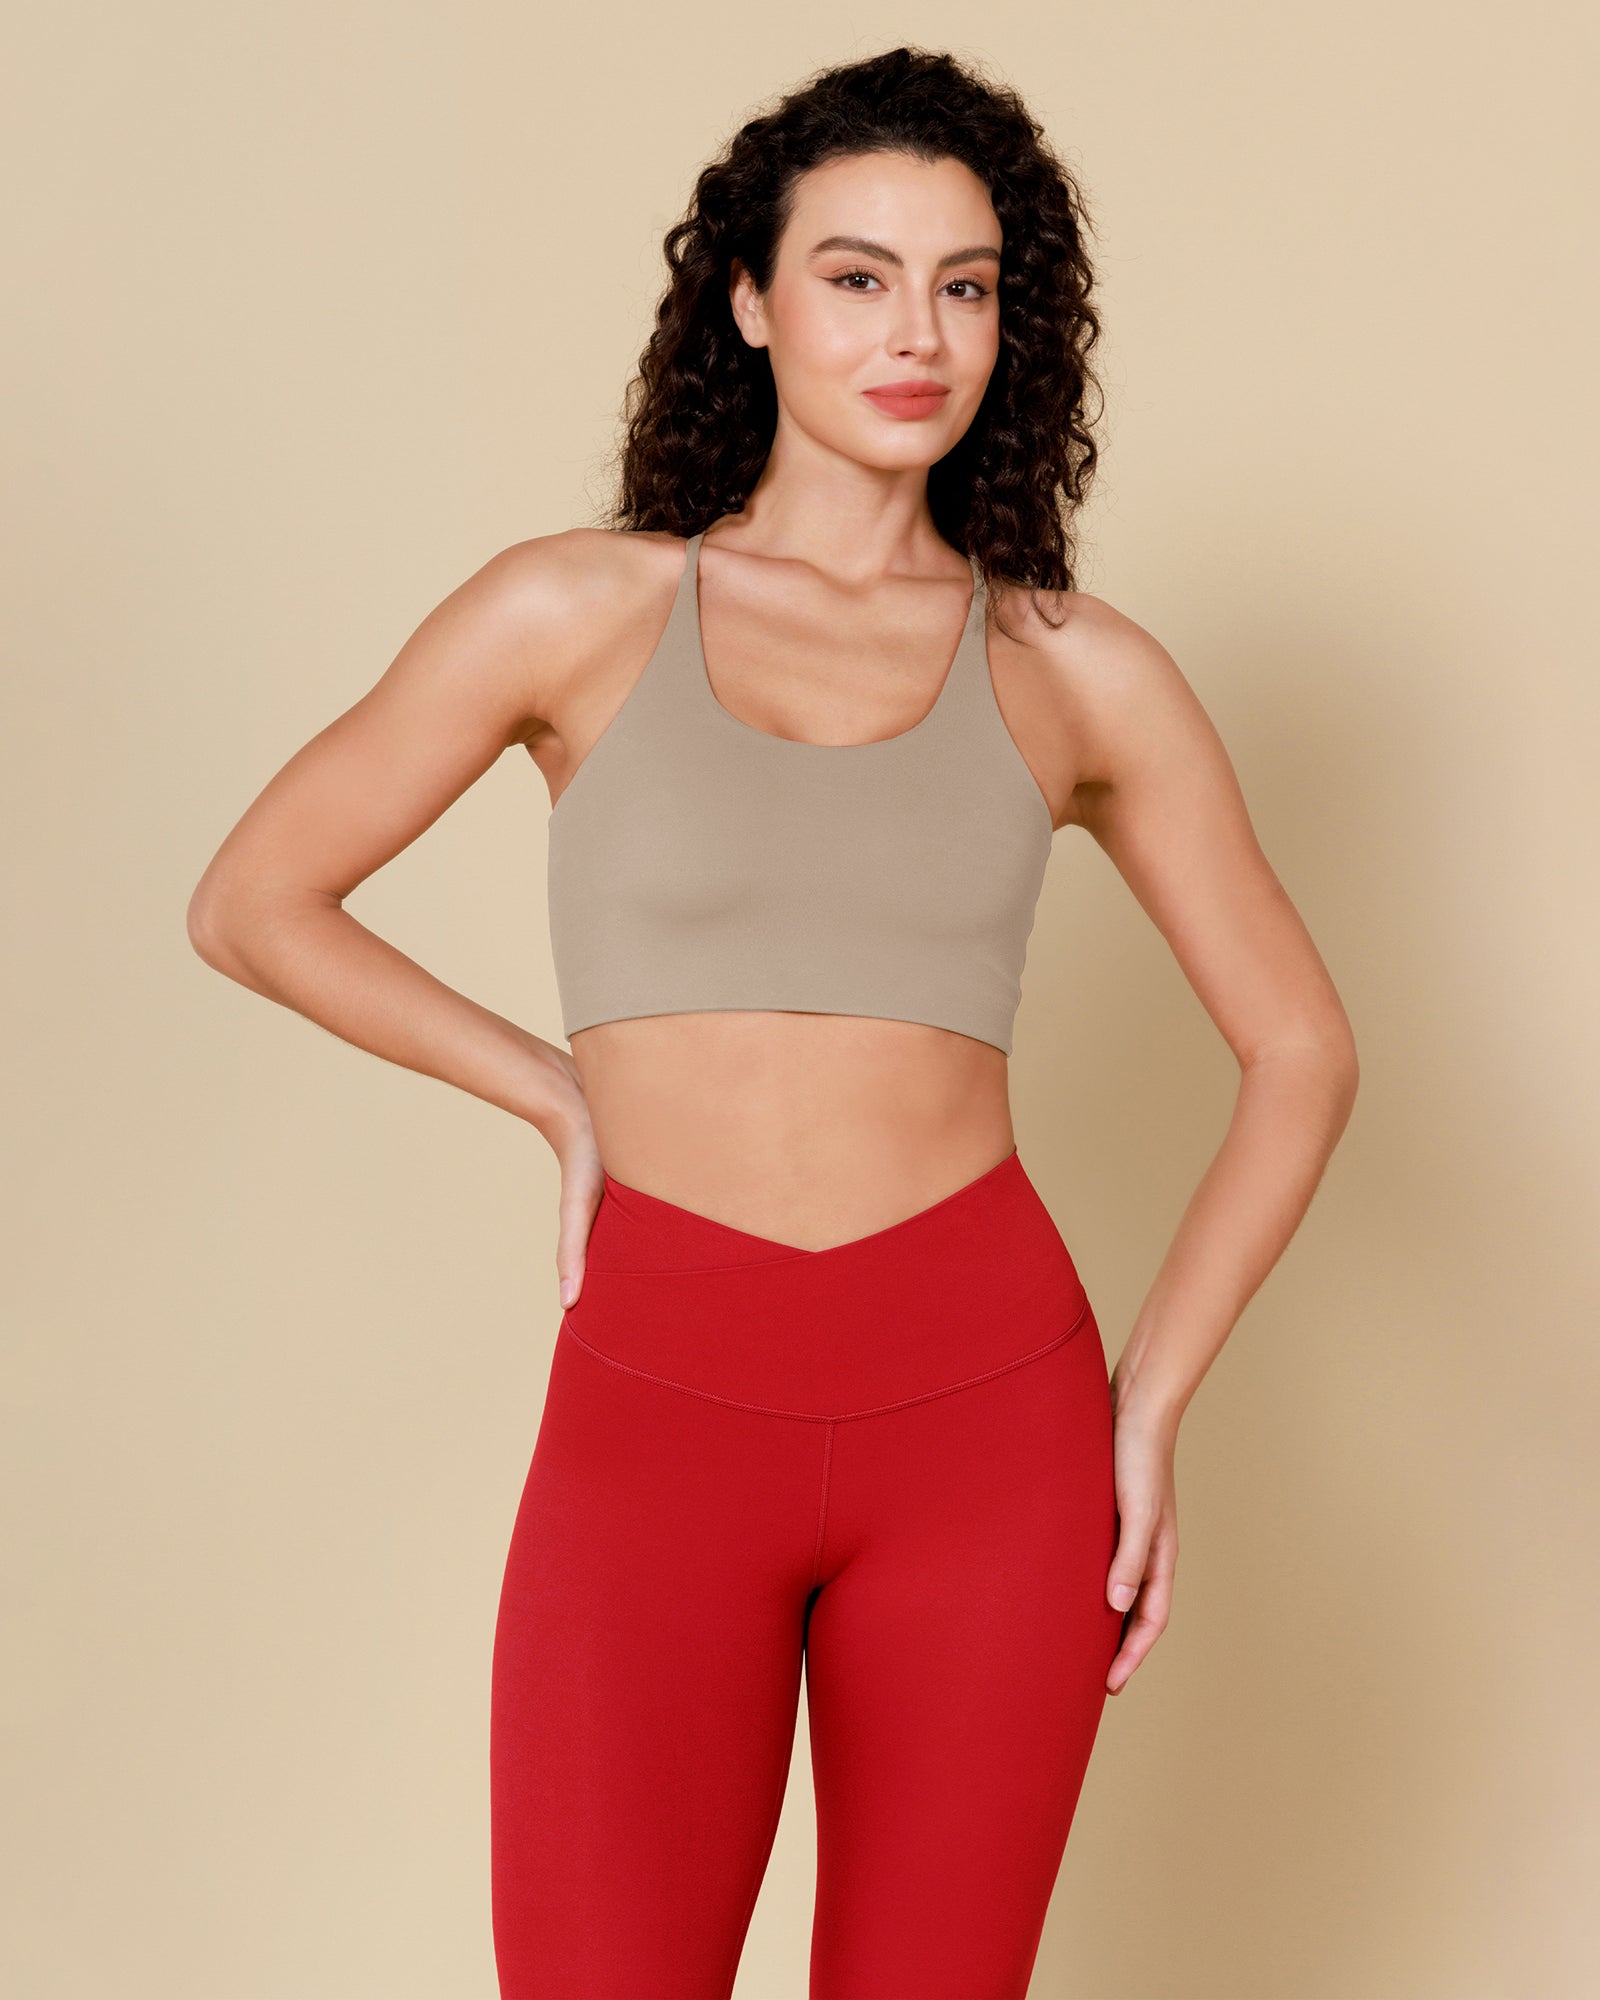 ODCLOUD Crossover 7/8 Leggings with Back Pocket Red - ododos